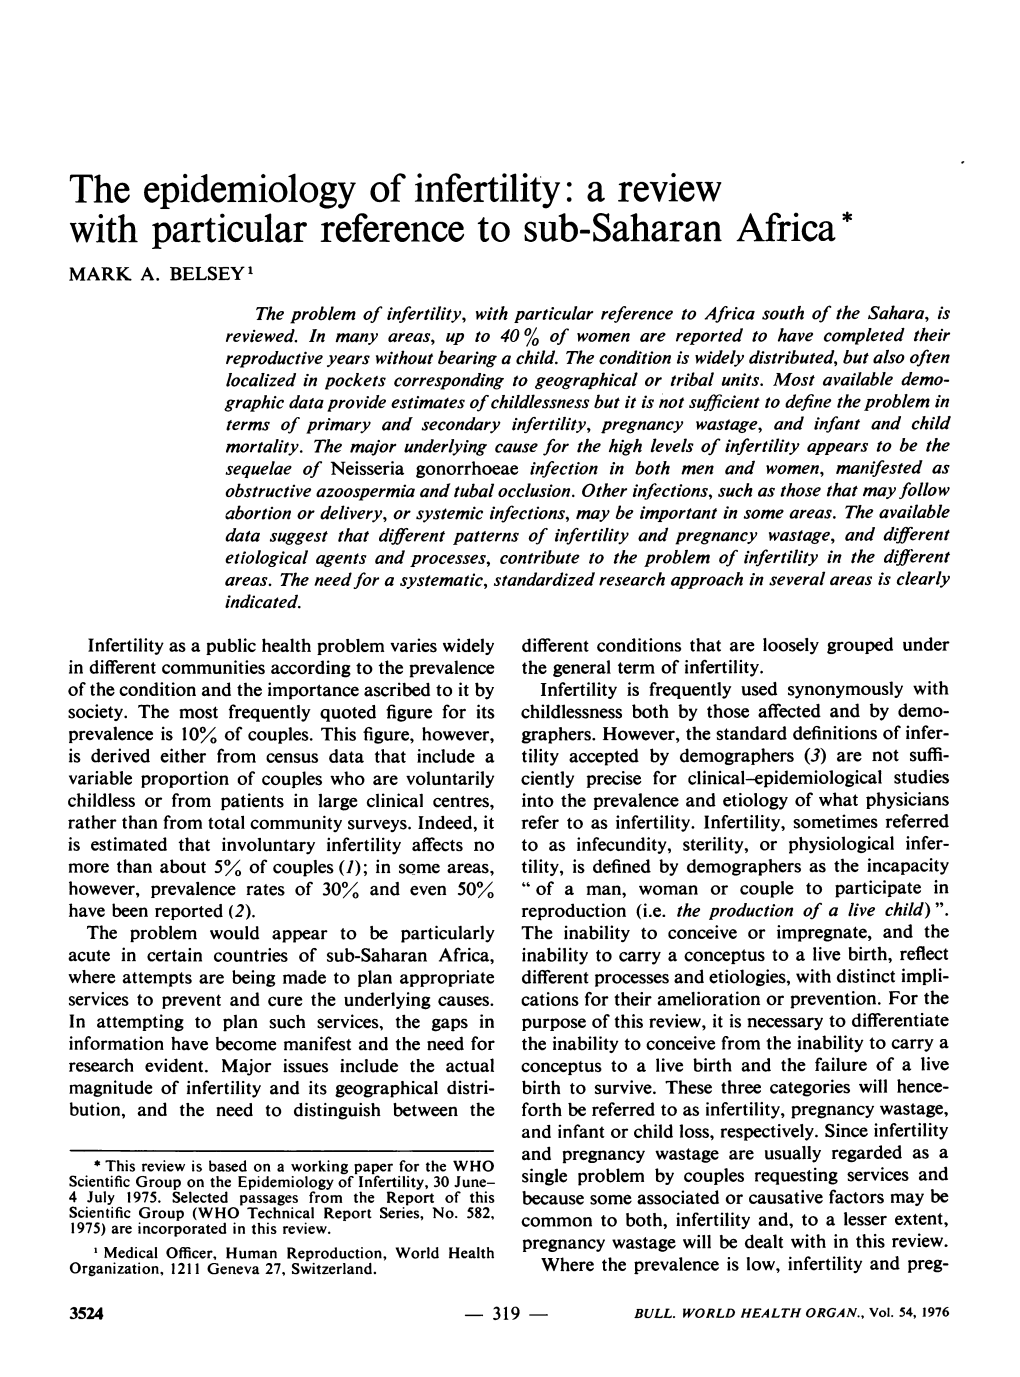 The Epidemiology of Infertility: a Review with Particular Reference to Sub-Saharan Africa* MARK A